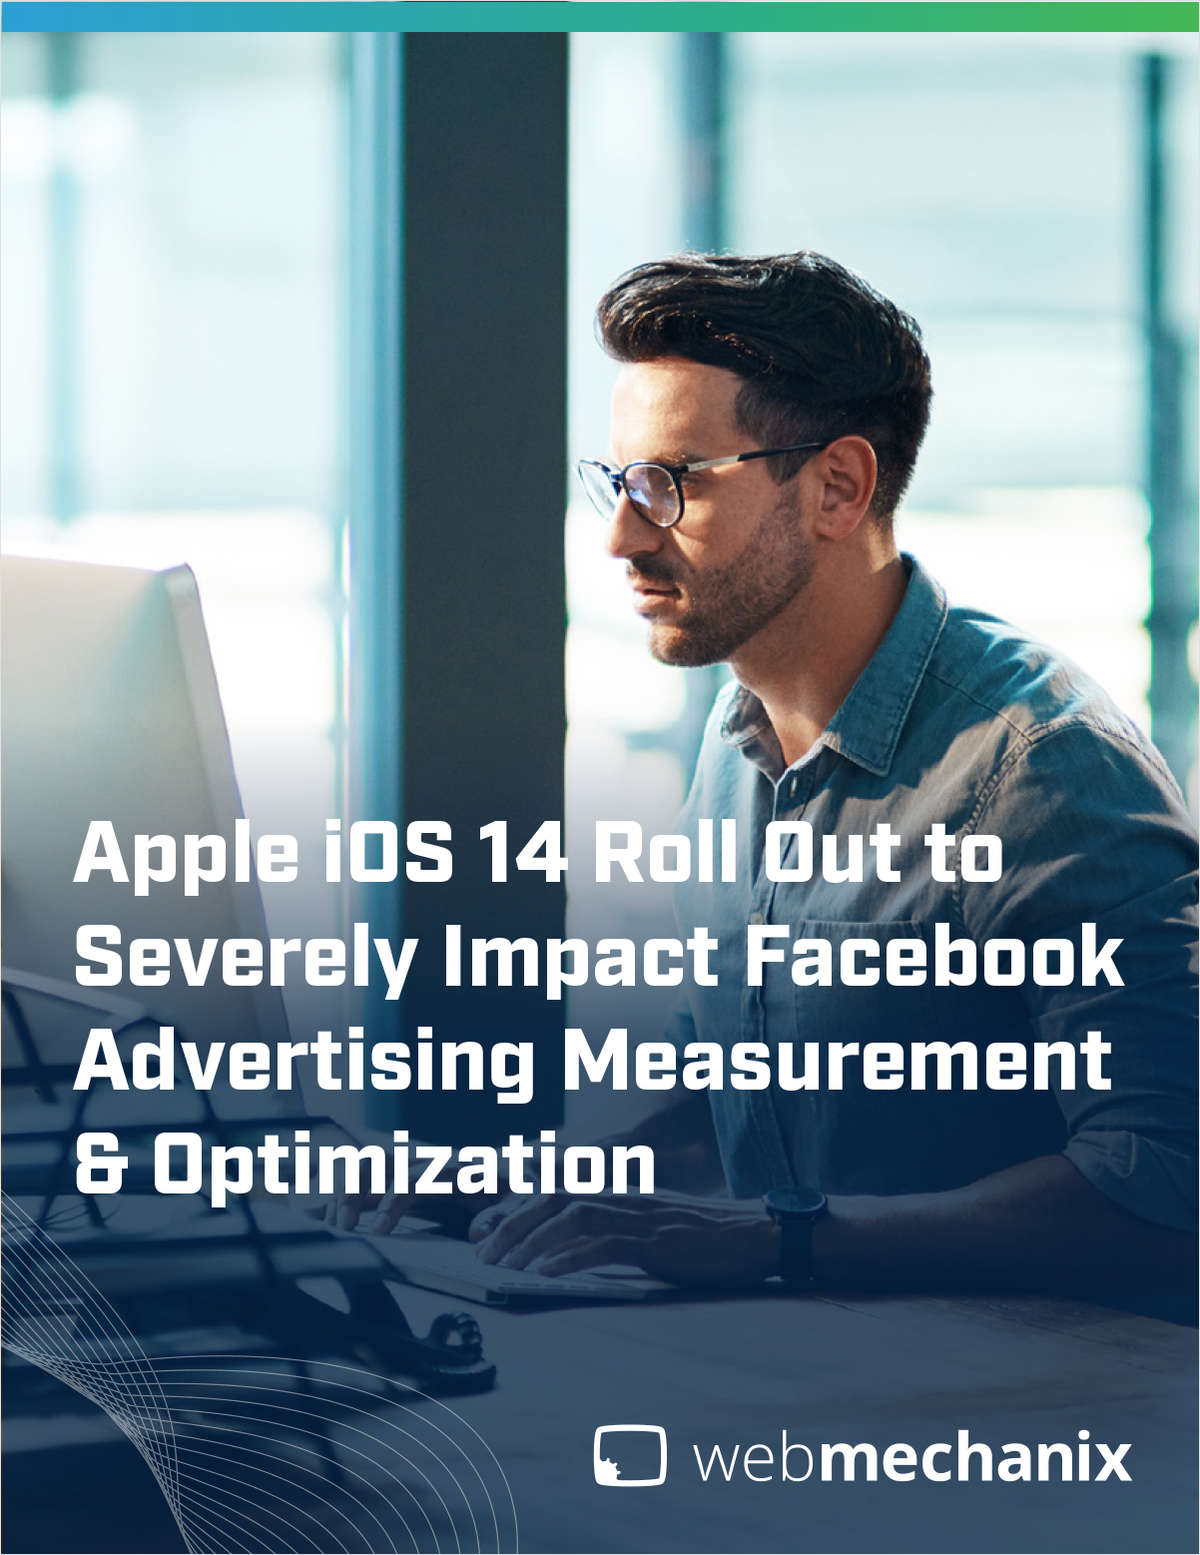 Apple iOS 14 Roll-Out may Severely Impact Advertising and Optimization